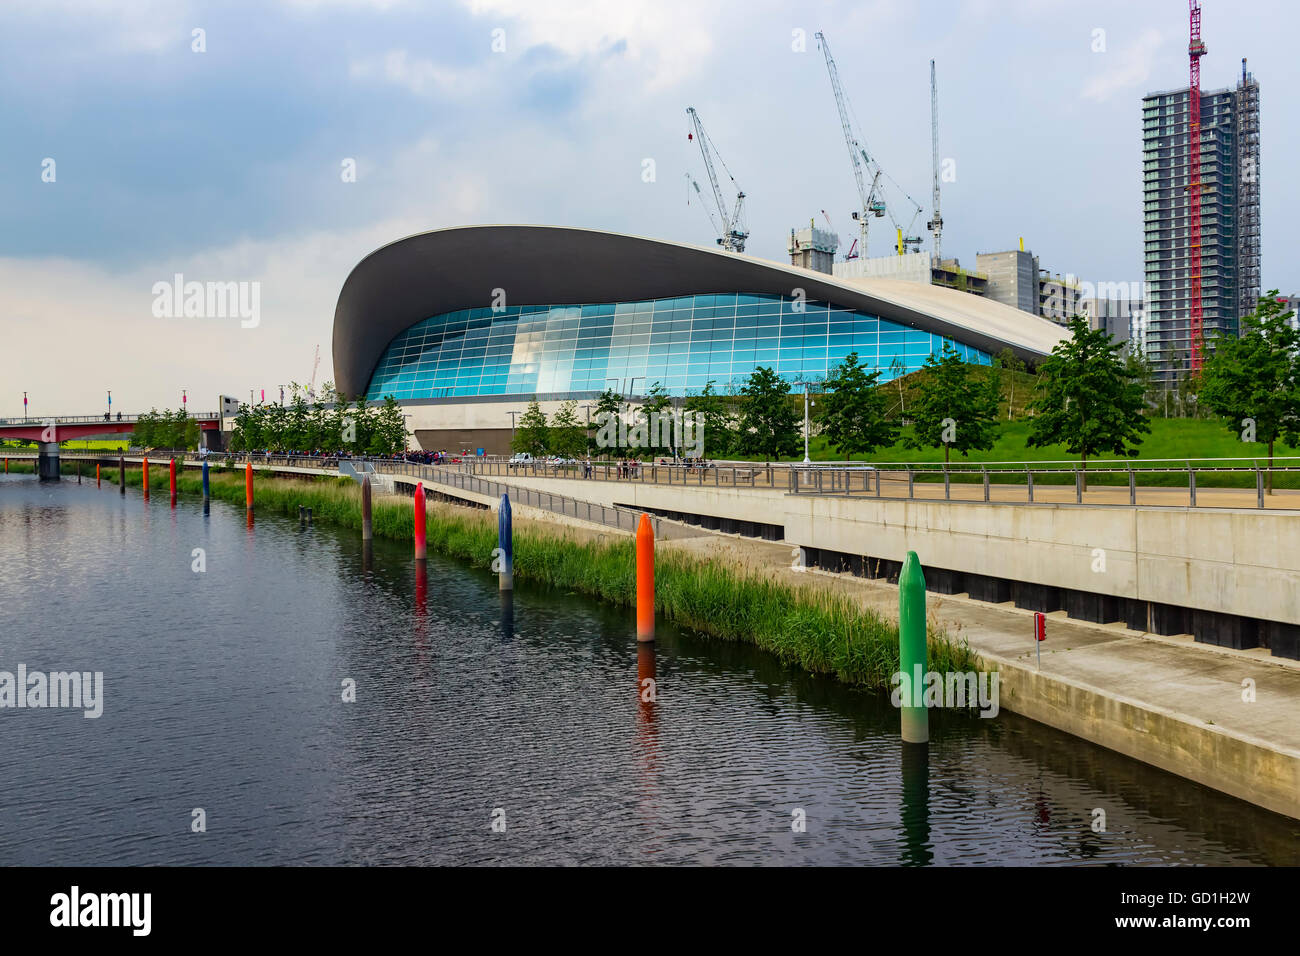 London, England - May 27, 2016: View of the London Aquatics Centre, a former Olympics venue with pools for diving and swimming, Stock Photo